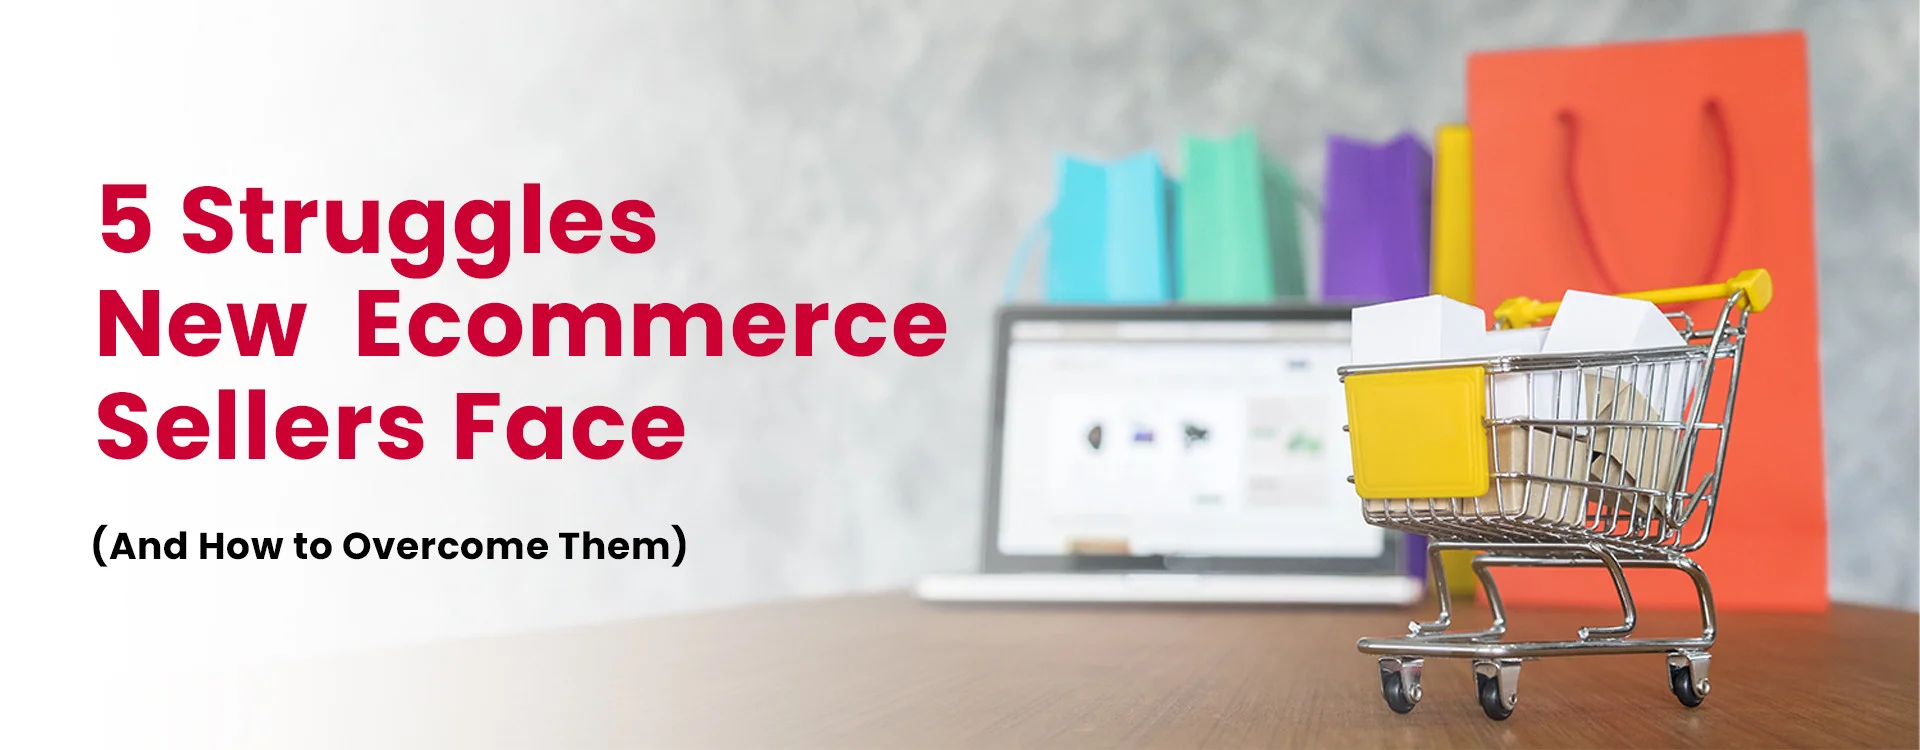 5 Struggles New Ecommerce Sellers Face (And How to Overcome Them)